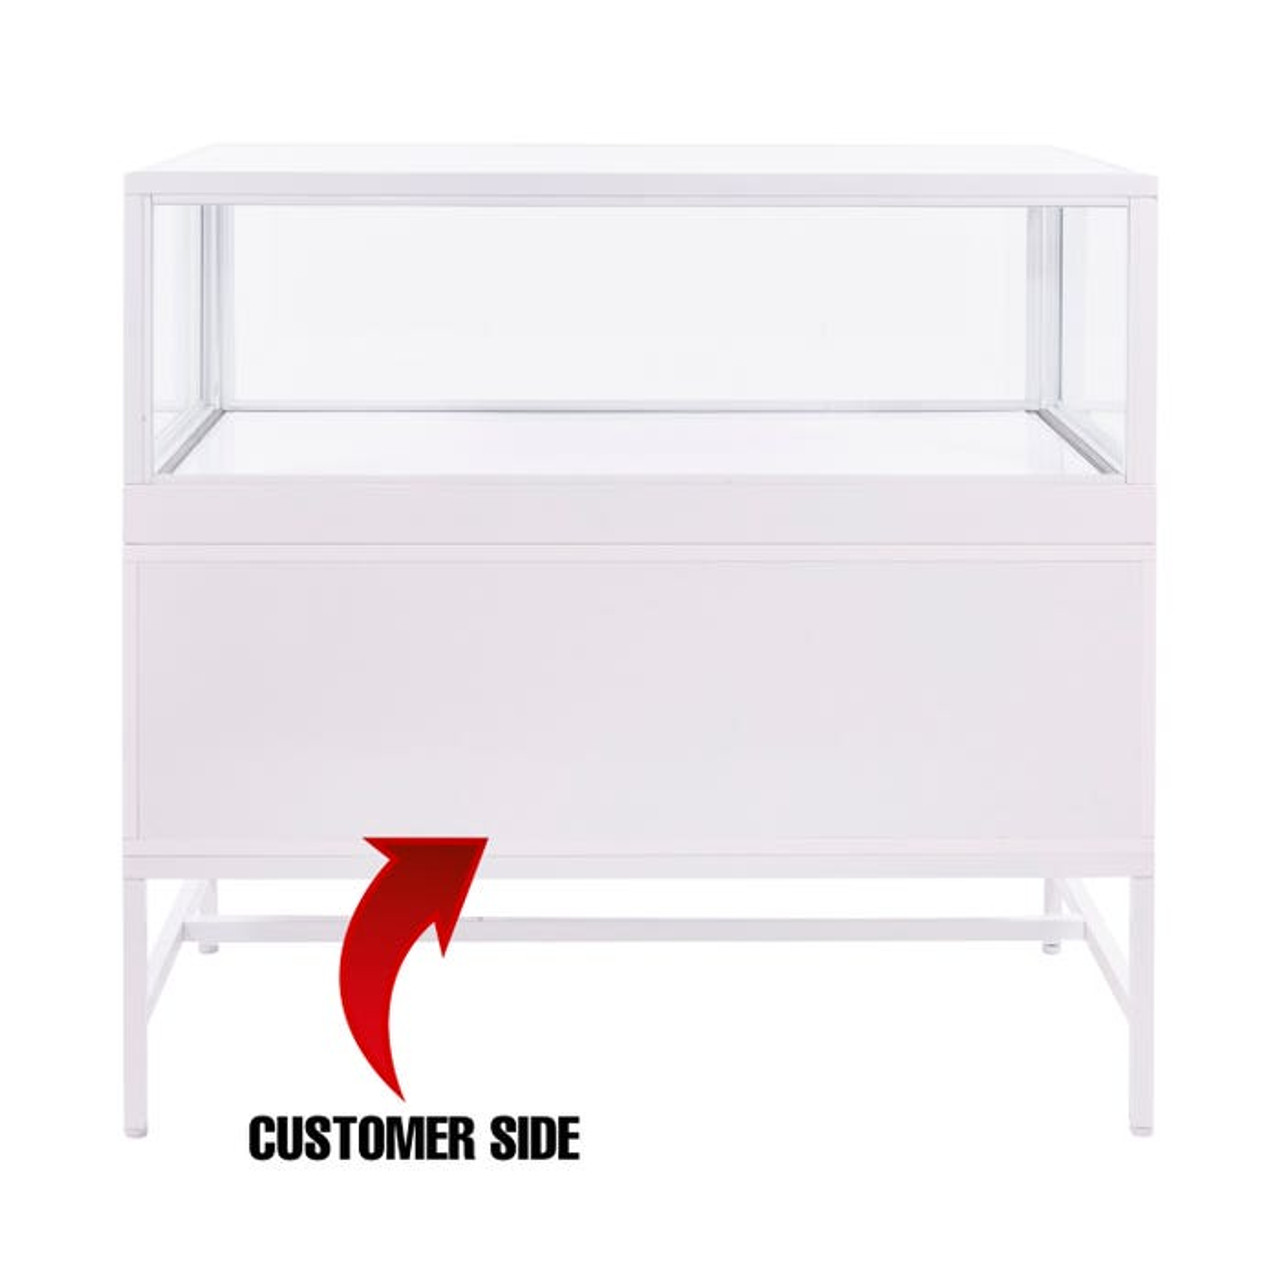 48" White Deluxe Glass Showcase with Storage includes Light & Lock